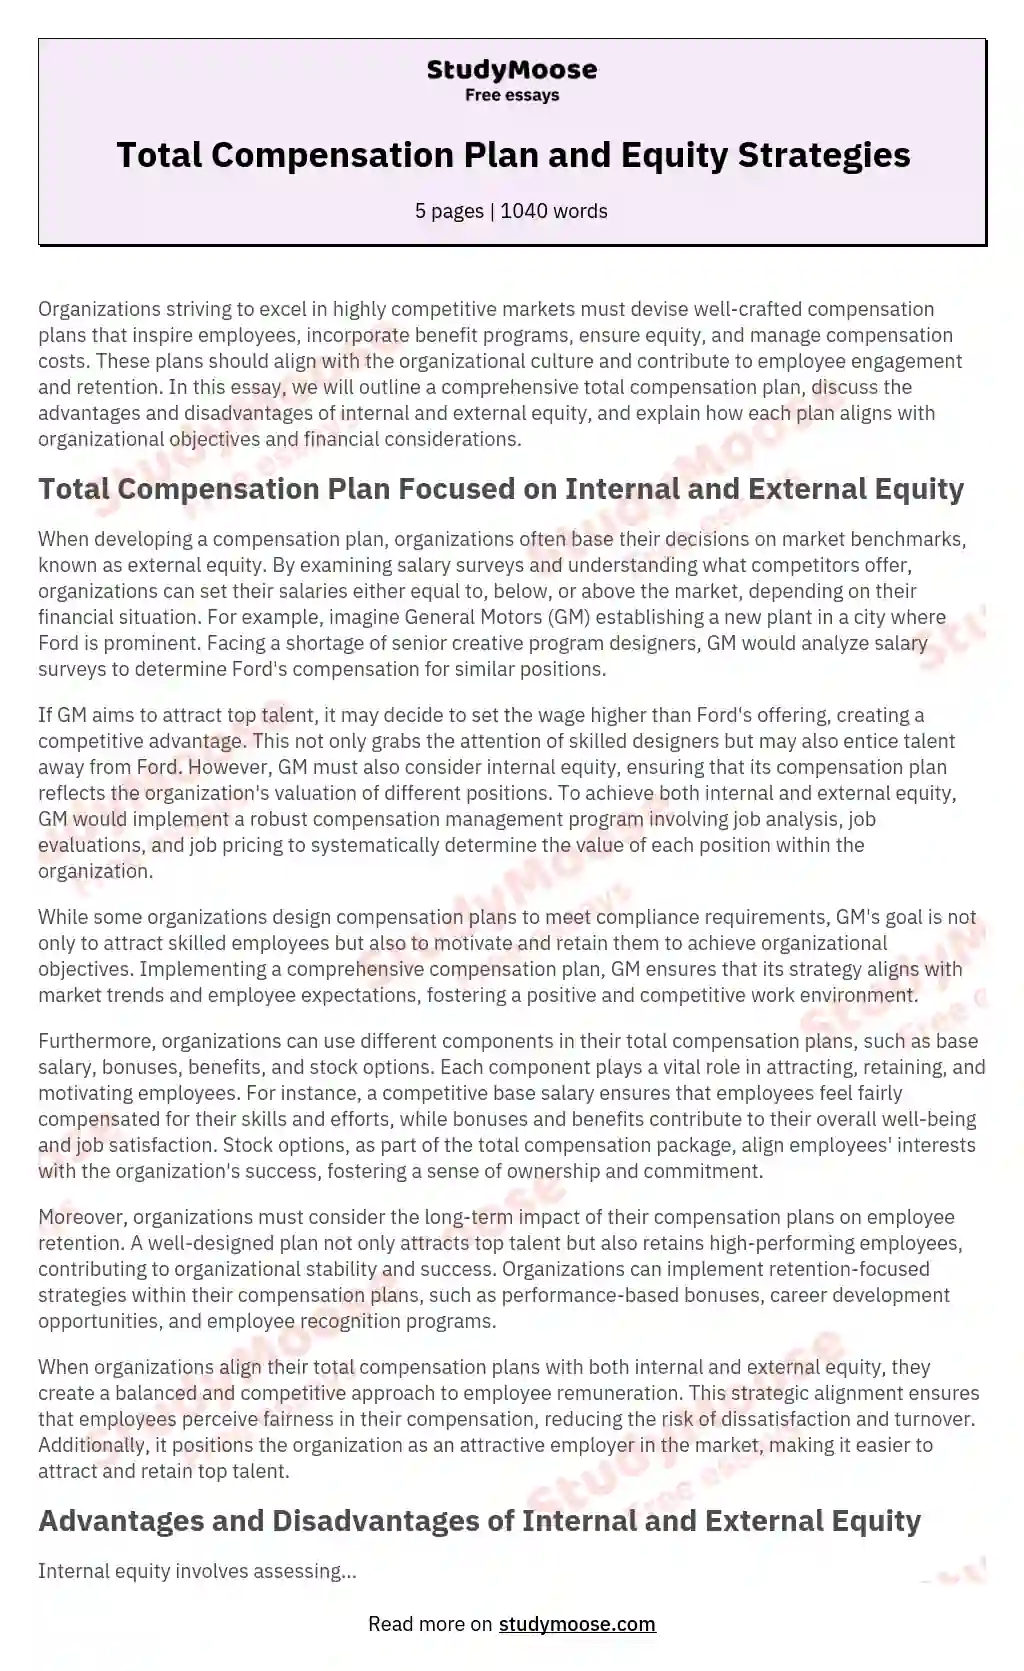 Total Compensation Plan and Equity Strategies essay